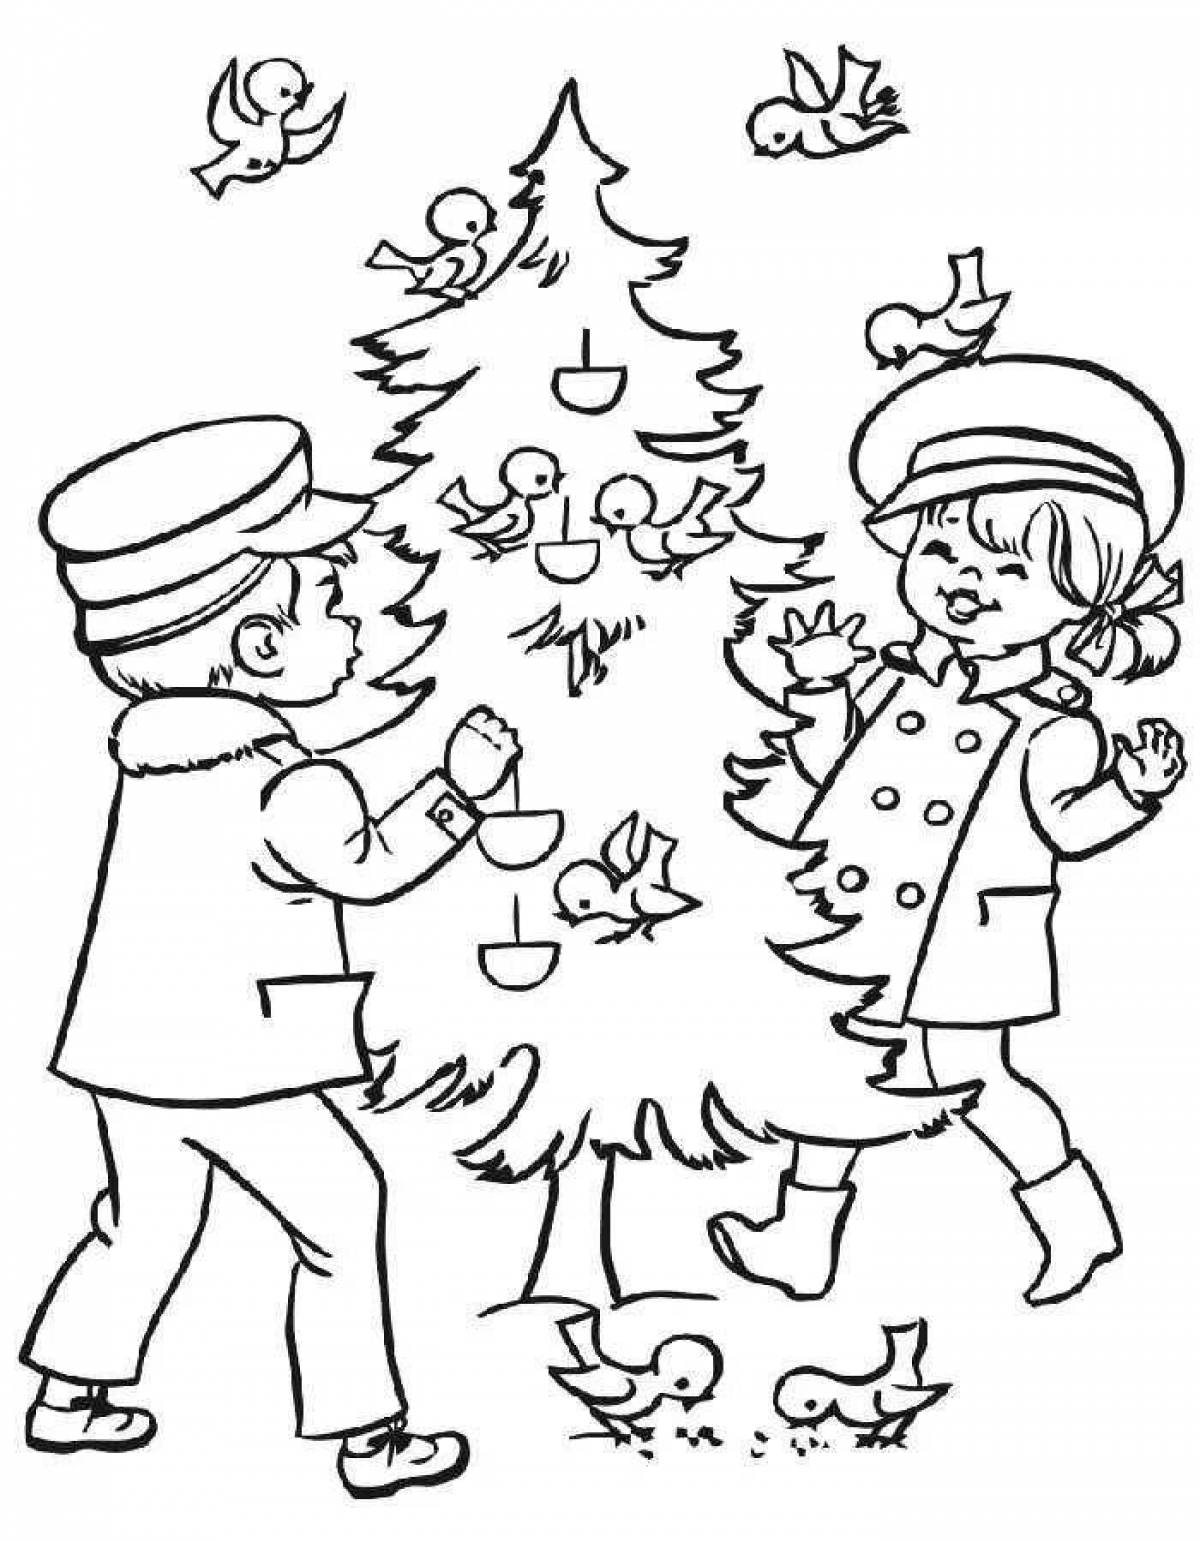 Happy safe new year coloring page